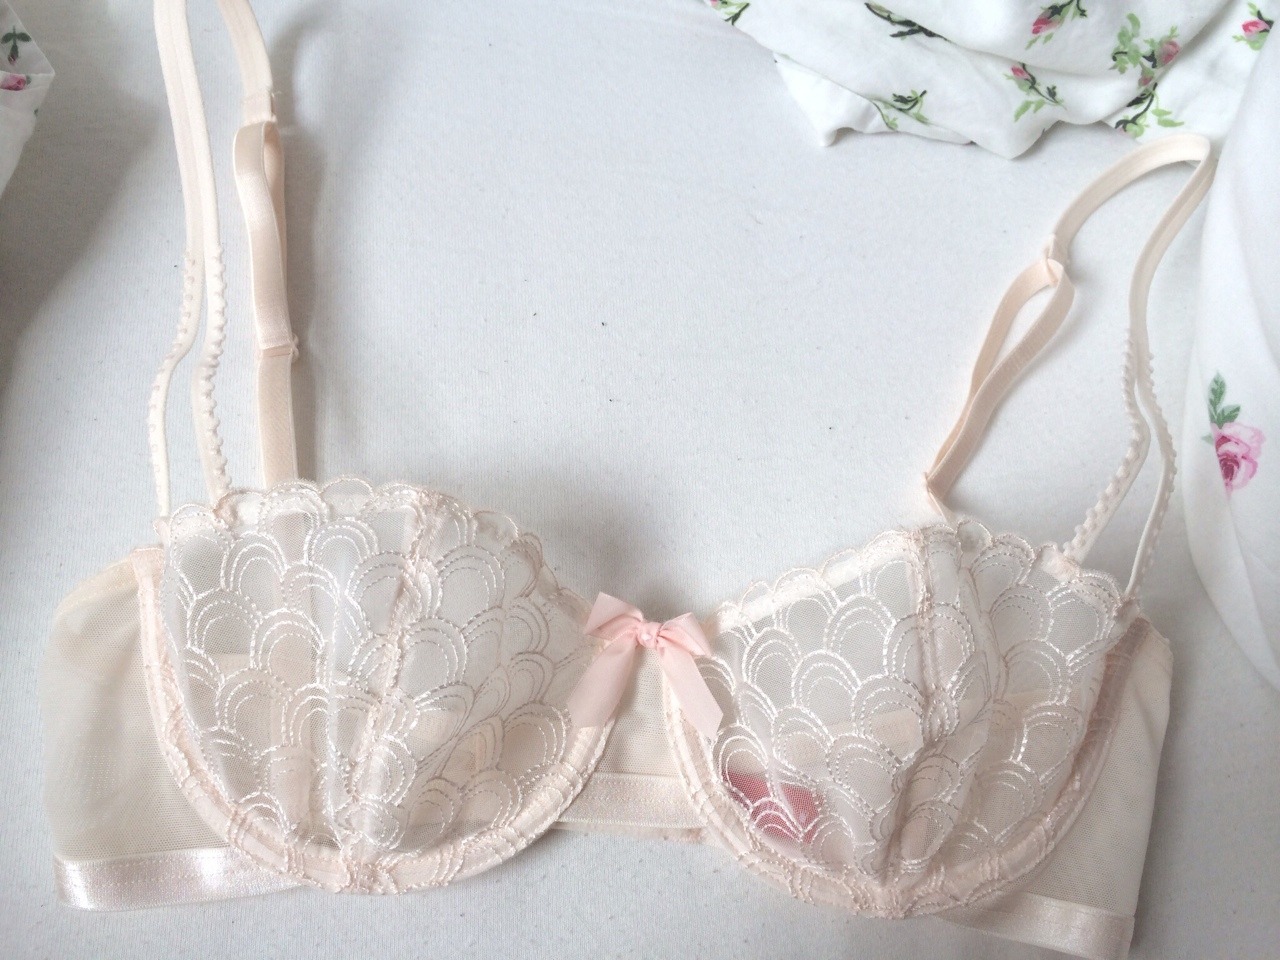 angel-veil: bought a new bra today